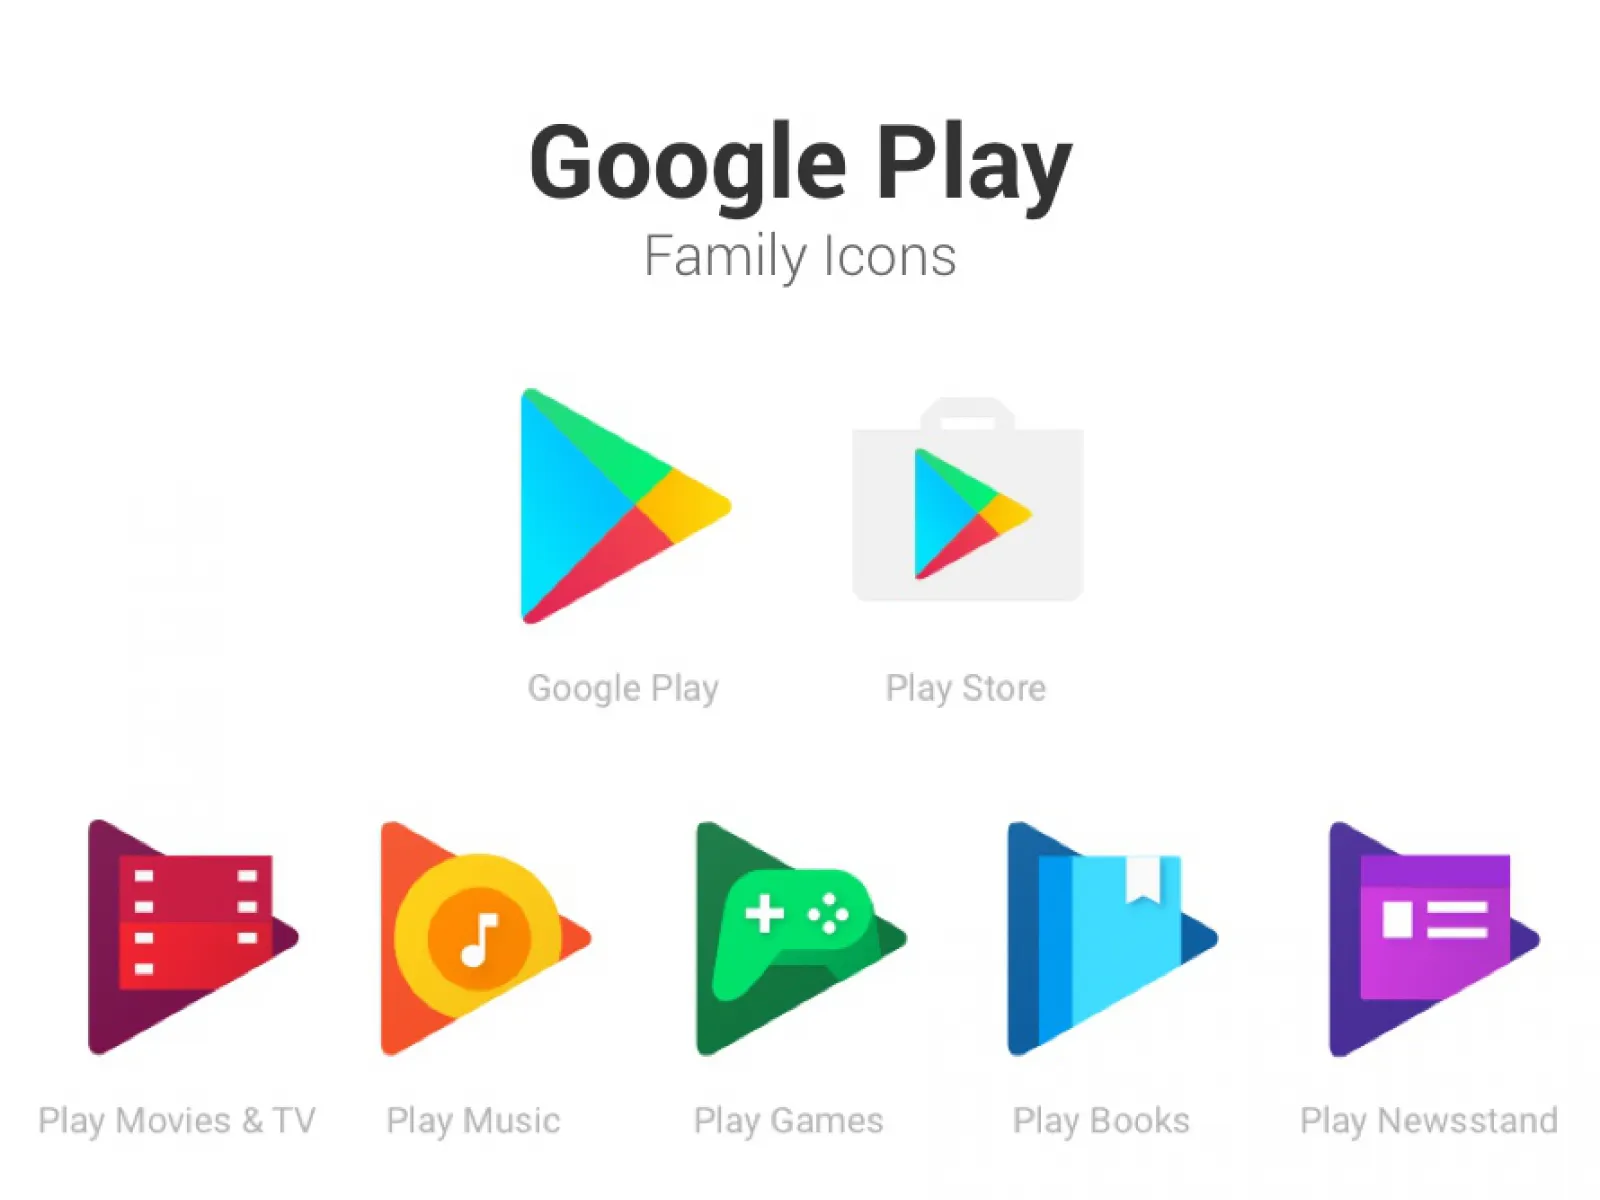 Google Play Family Icons  - Free Figma Template